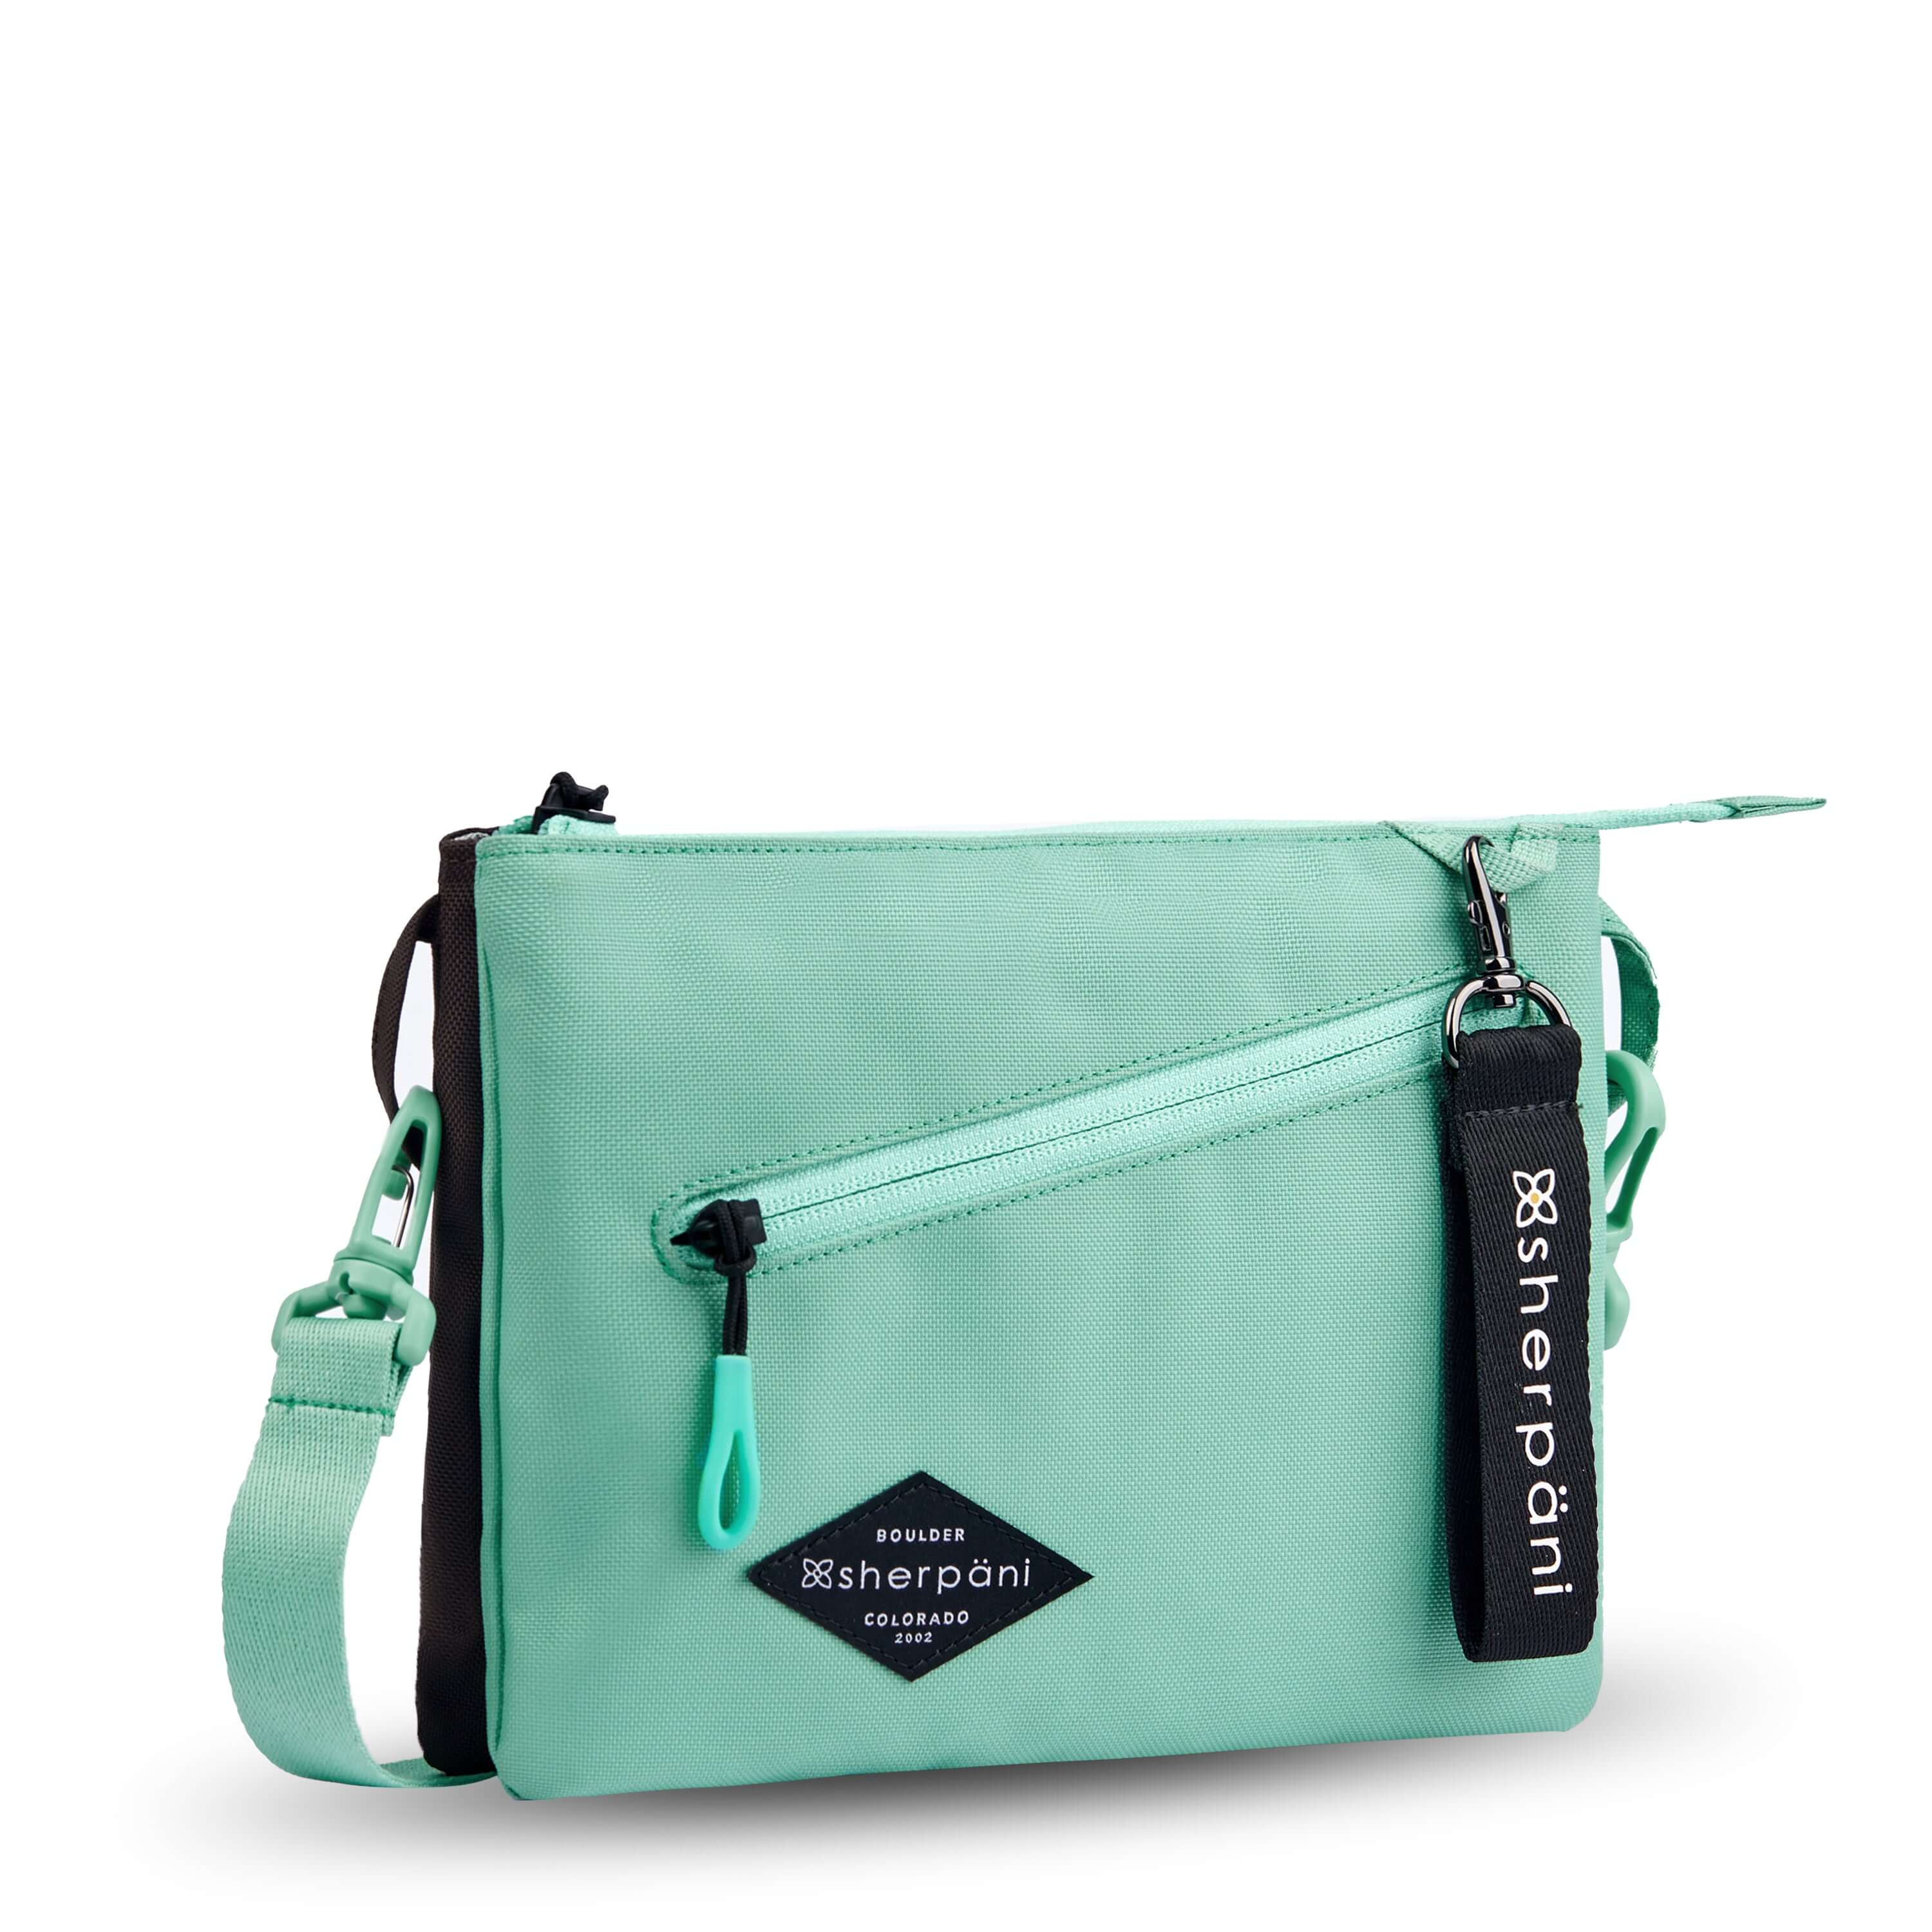 Angled front view of Sherpani crossbody, the Zoom in Seagreen. The bag is two-toned; the front half is light gray and the back half is brown. There is an external zipper pocket on the front with an easy-pull zipper accented in light green. The bag has an adjustable/detachable crossbody strap. There is a branded Sherpani keychain clipped to a fabric loop on the upper right corner. #color_seagreen